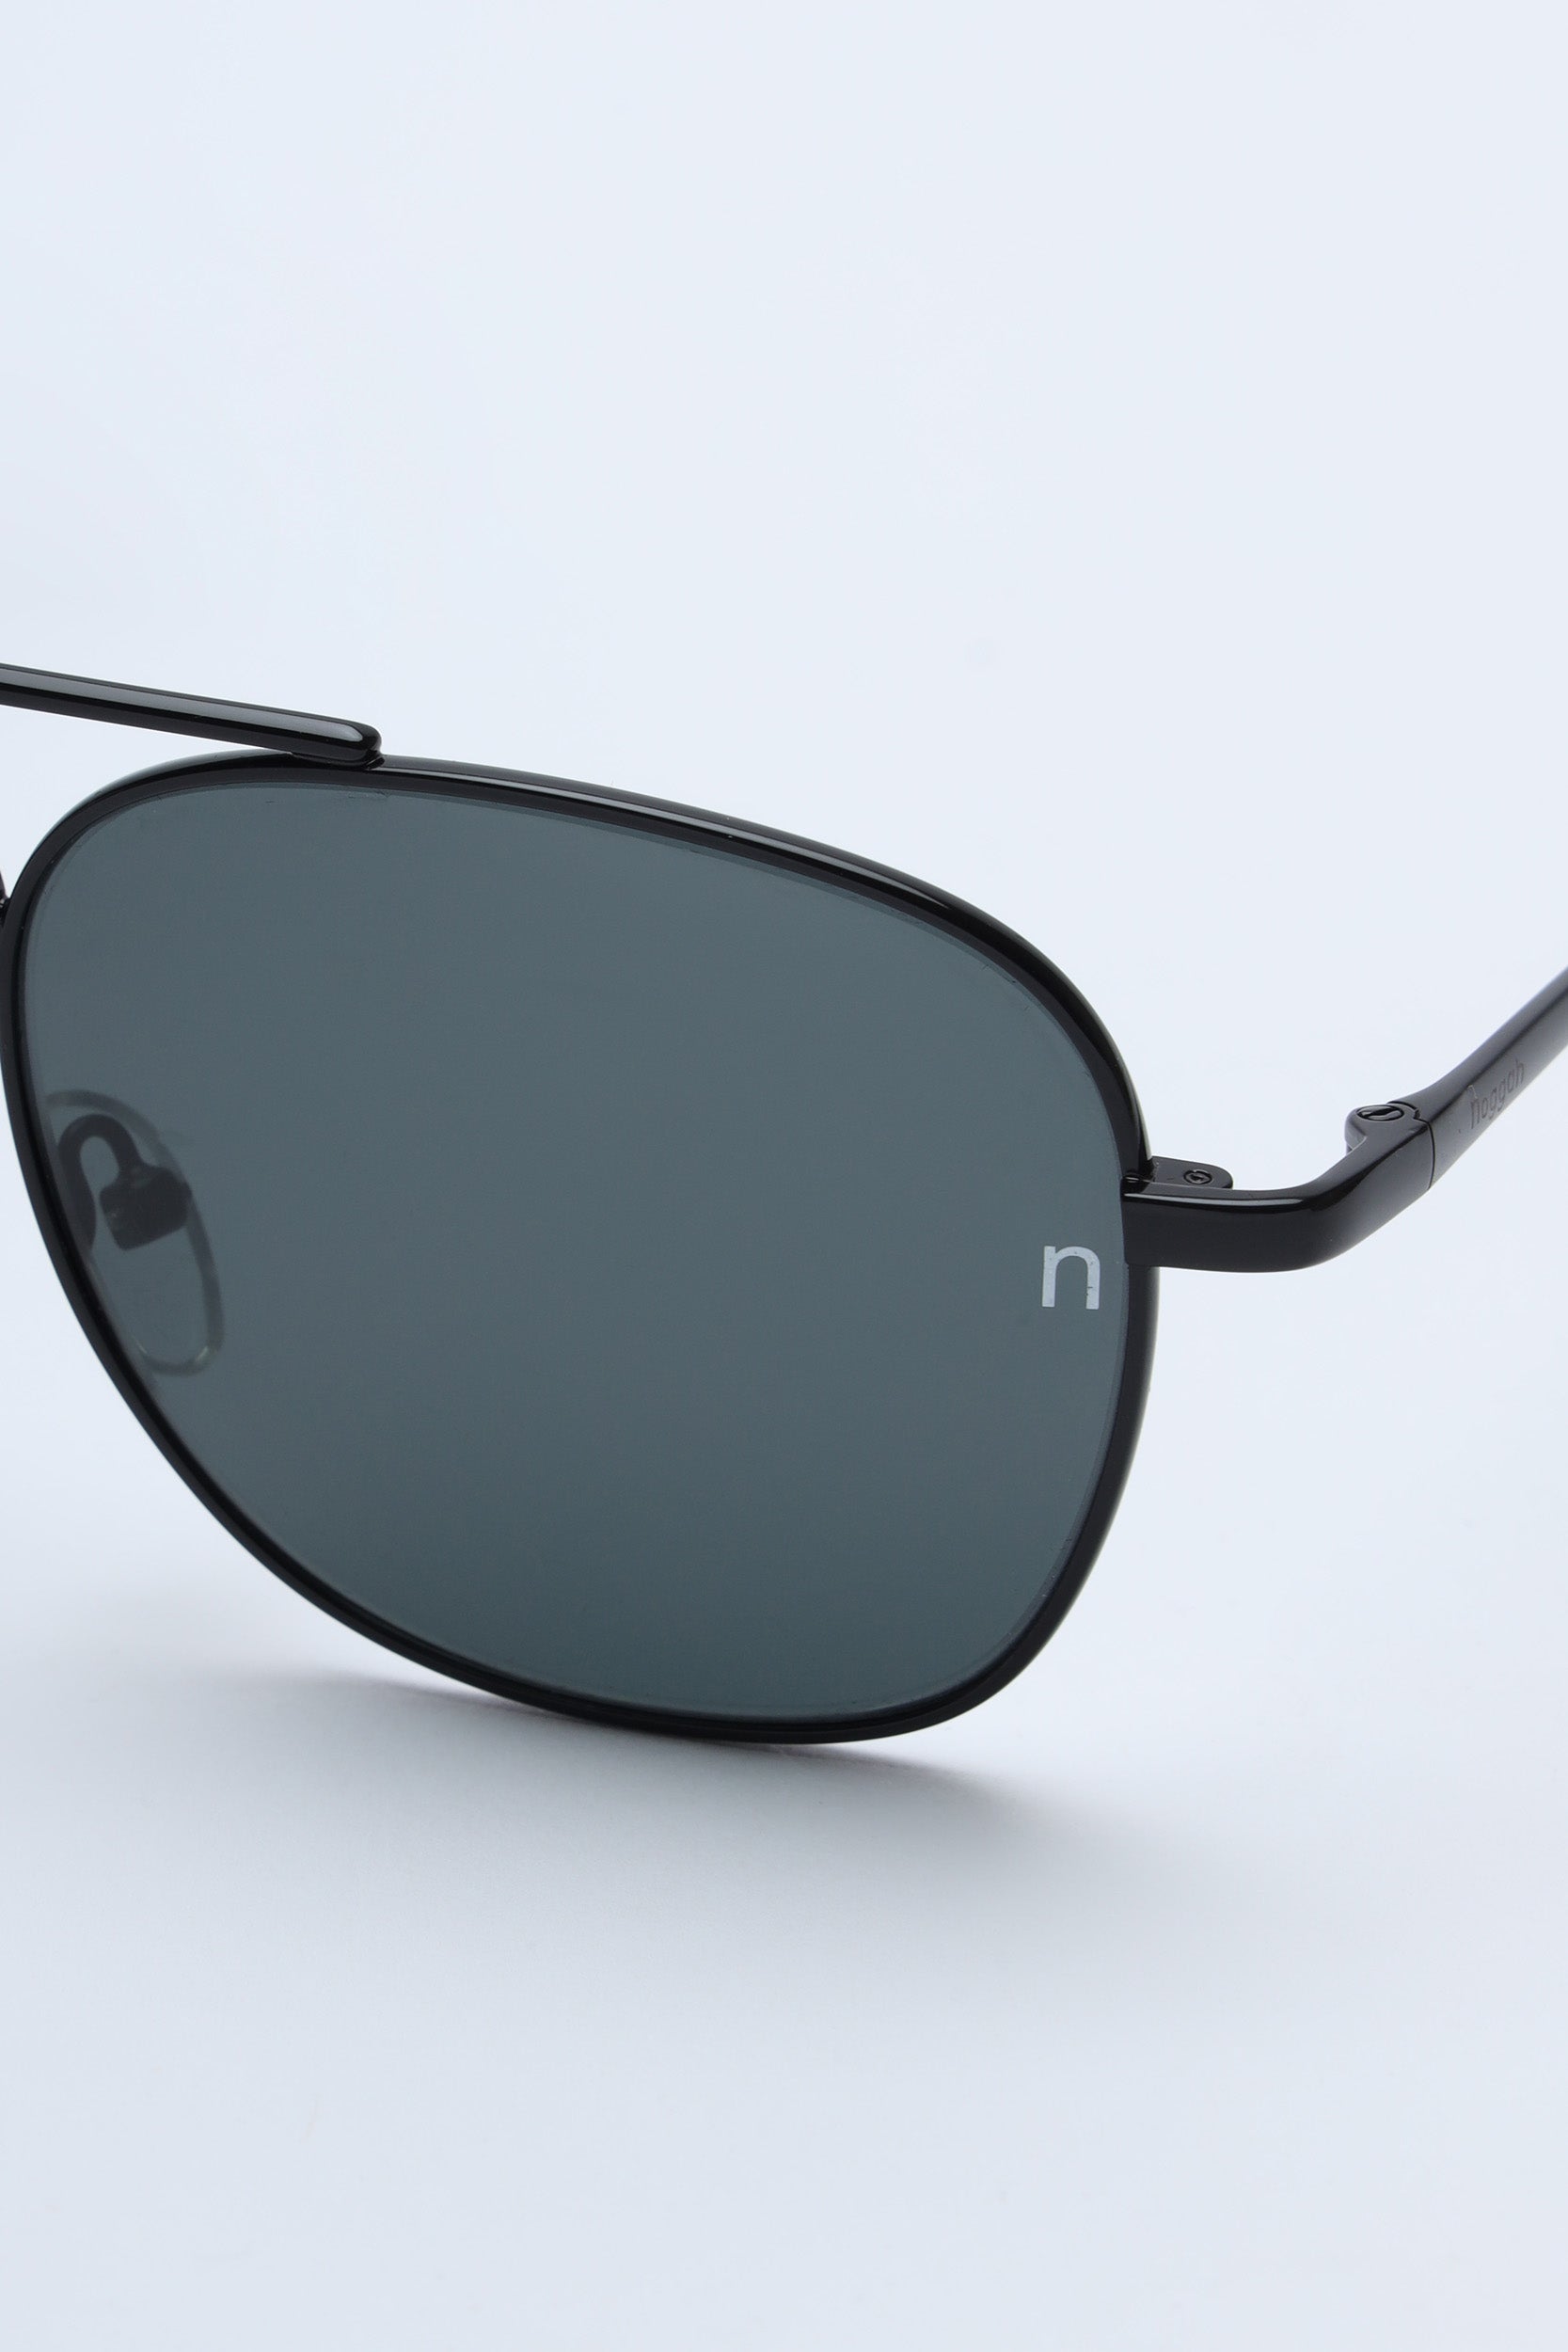 NS2006BFBL Stainless Steel Black Frame with Black Glass Lens Sunglasses